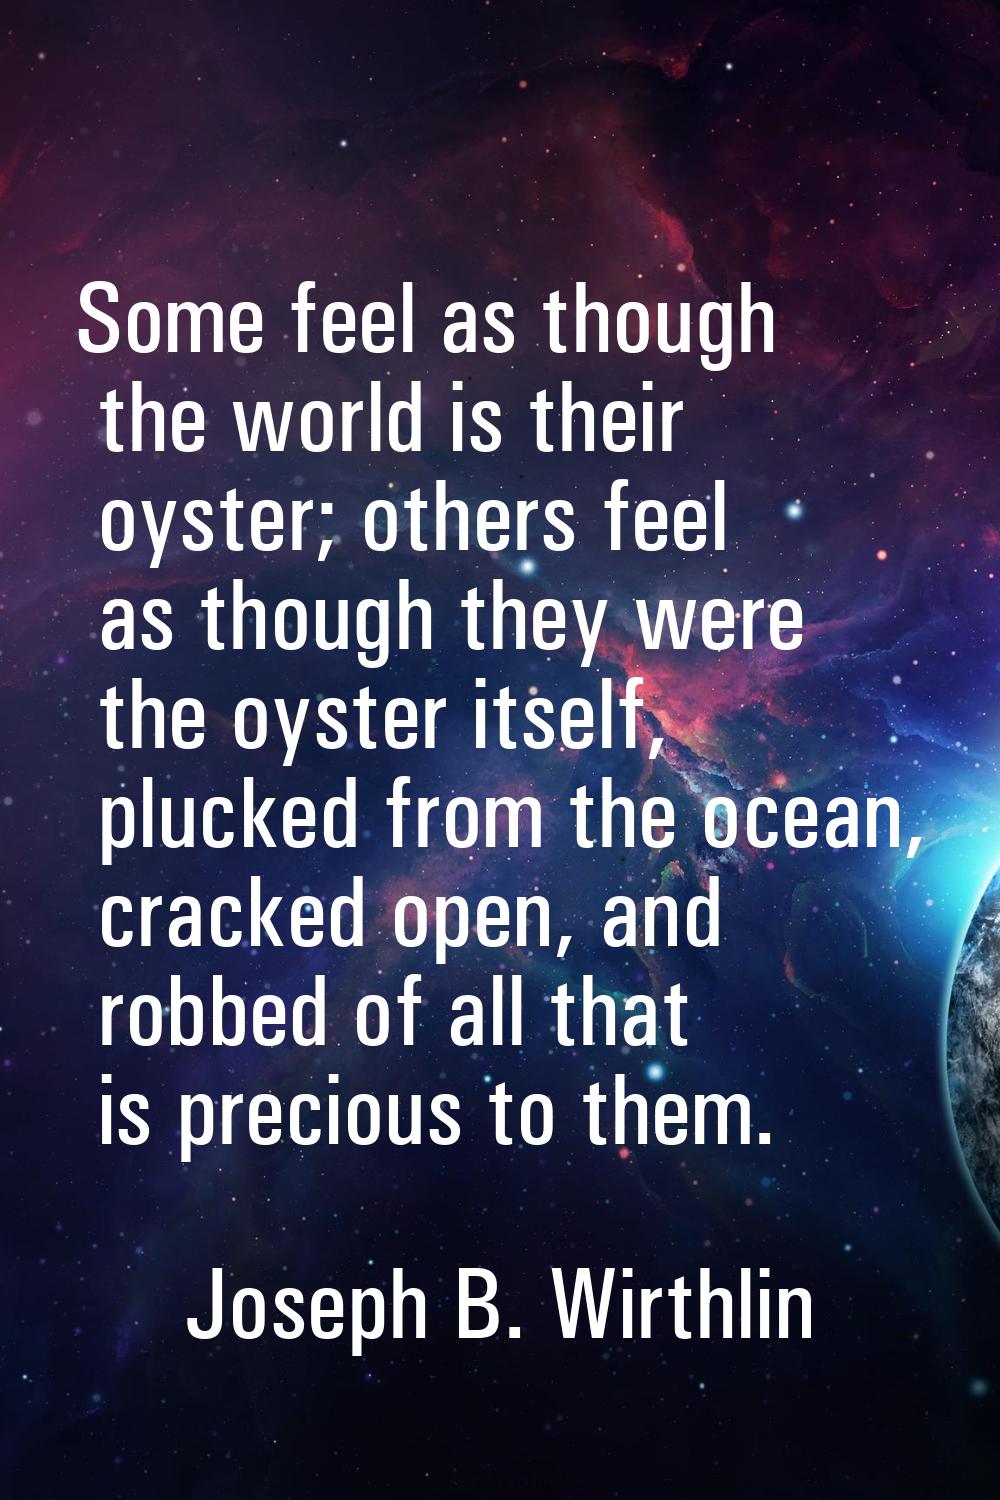 Some feel as though the world is their oyster; others feel as though they were the oyster itself, p